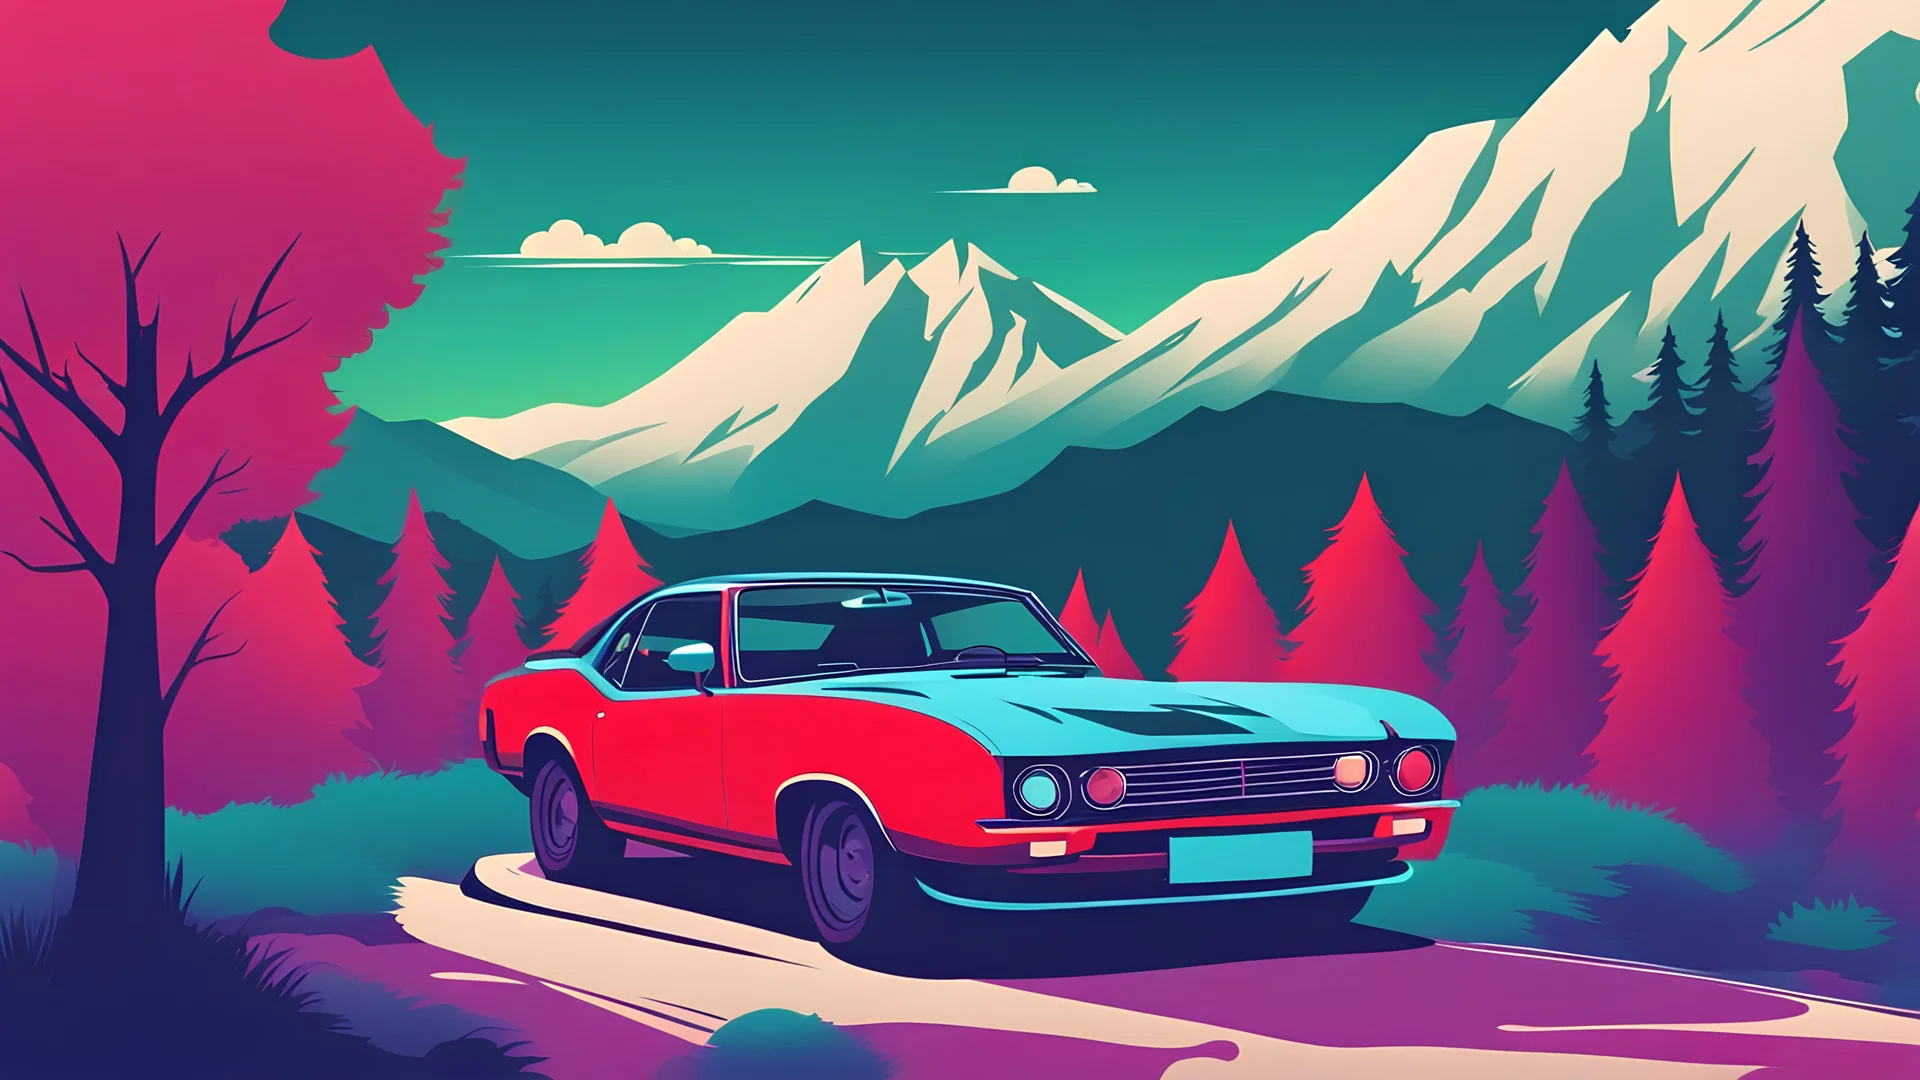 Create me a desktop wallpaper in Full HD, the wallpaper should be mix of (((Blue))) (((Red))) and slightly (((green))), mountains, purple, trees, car